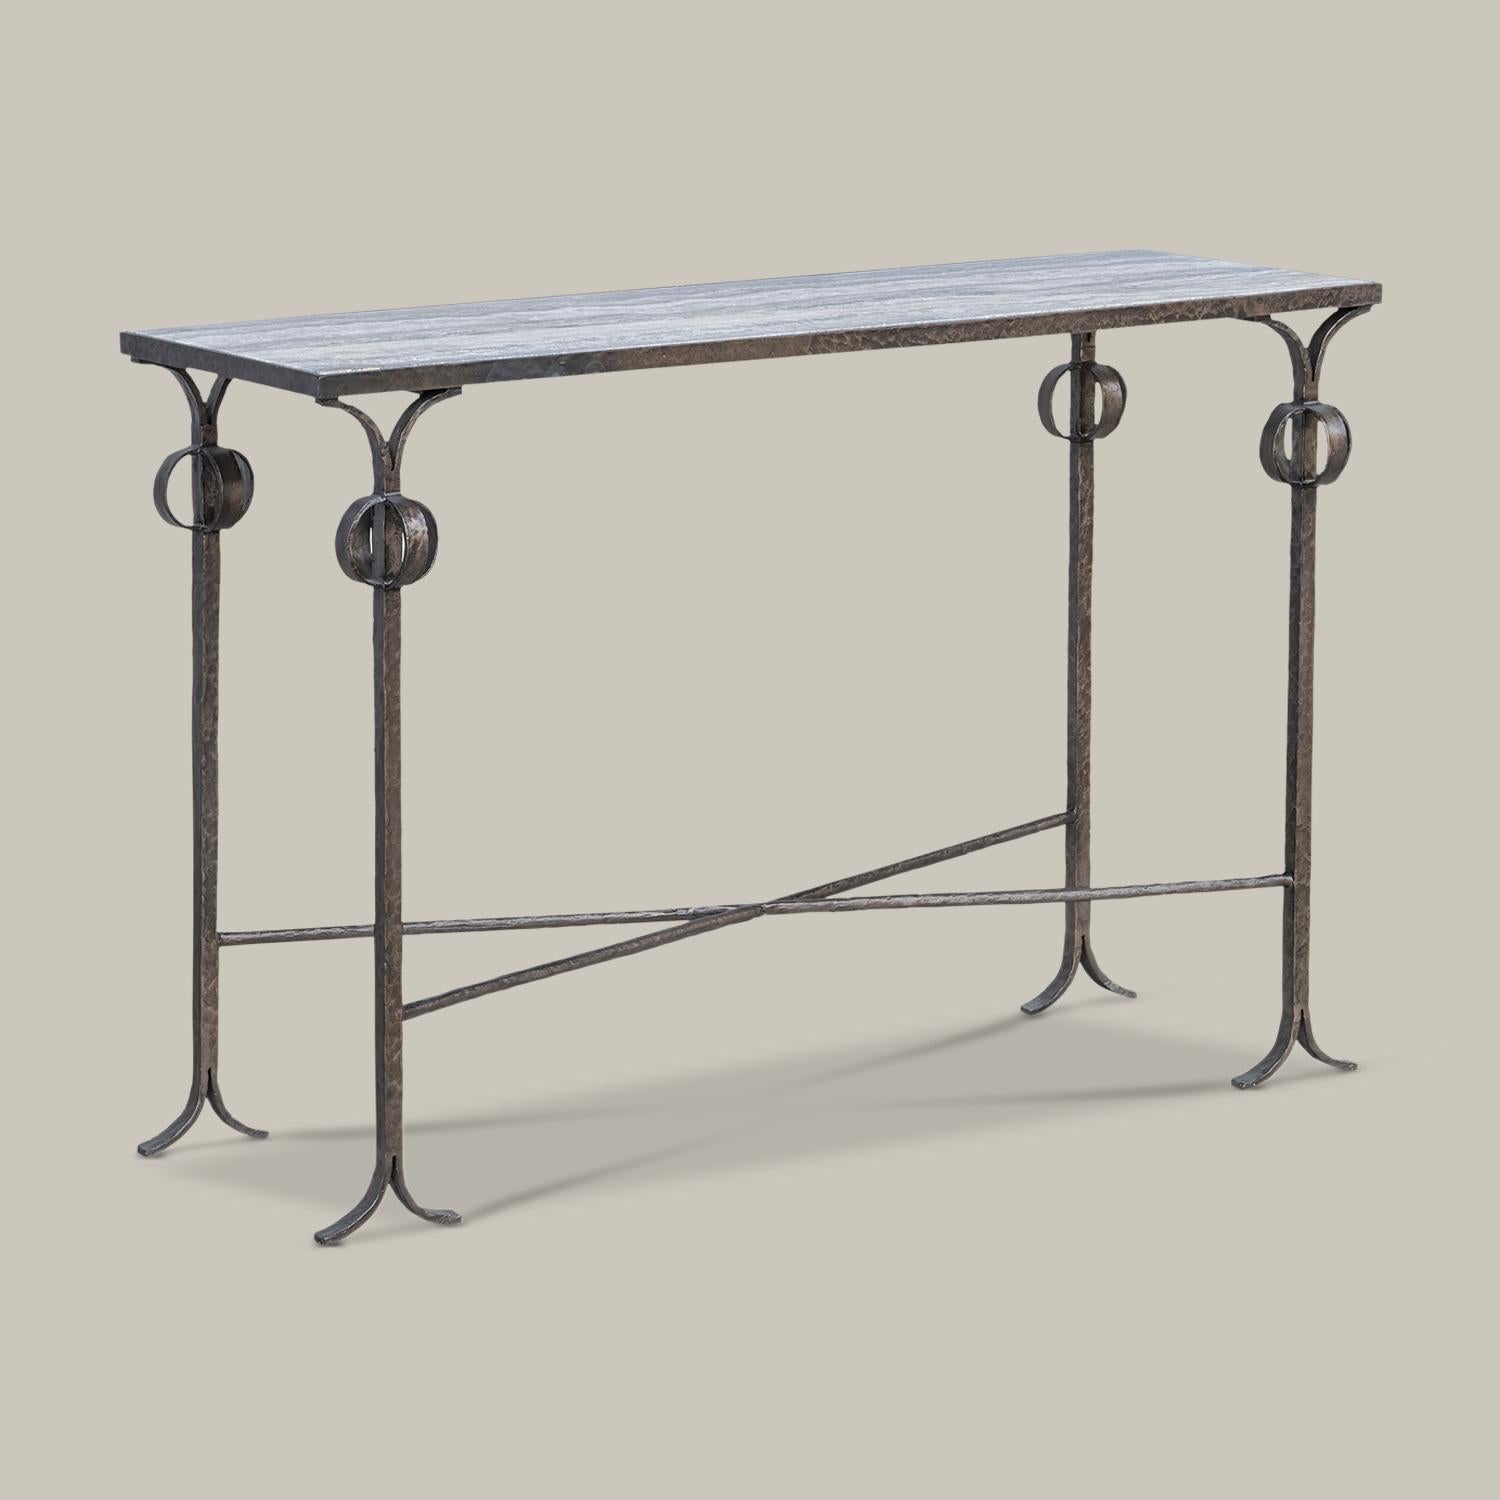 Inspired by the sculptural ironwork of Diego Giacometti, this decorative, functional, modern console table features a natural marble top.